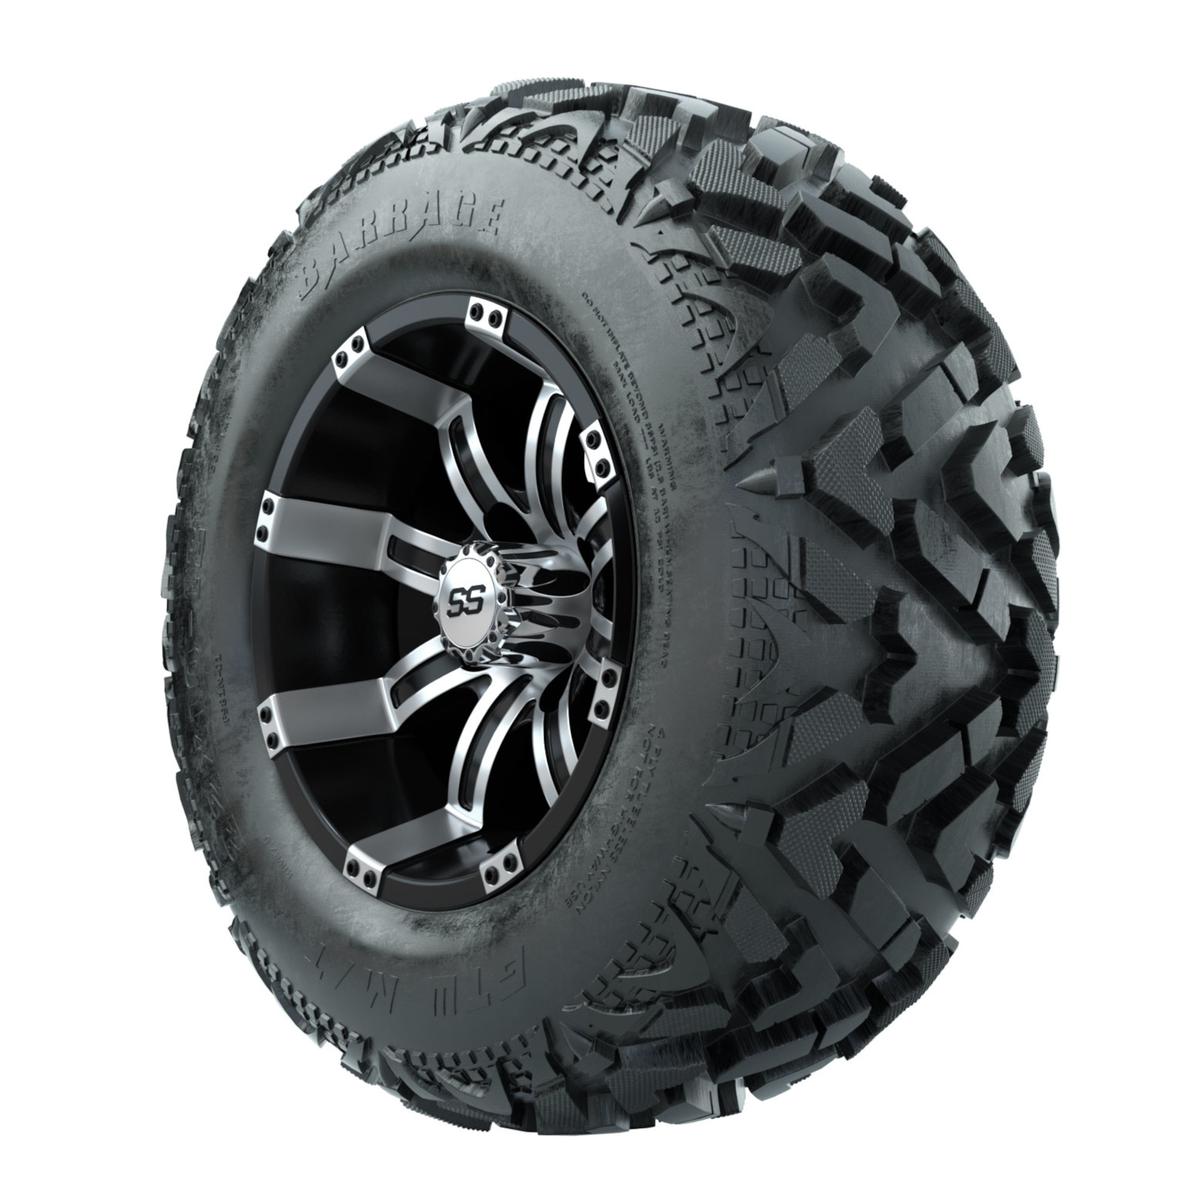 12” GTW Tempest Black and Machined Wheels with 23” Barrage Mud Tires – Set of 4